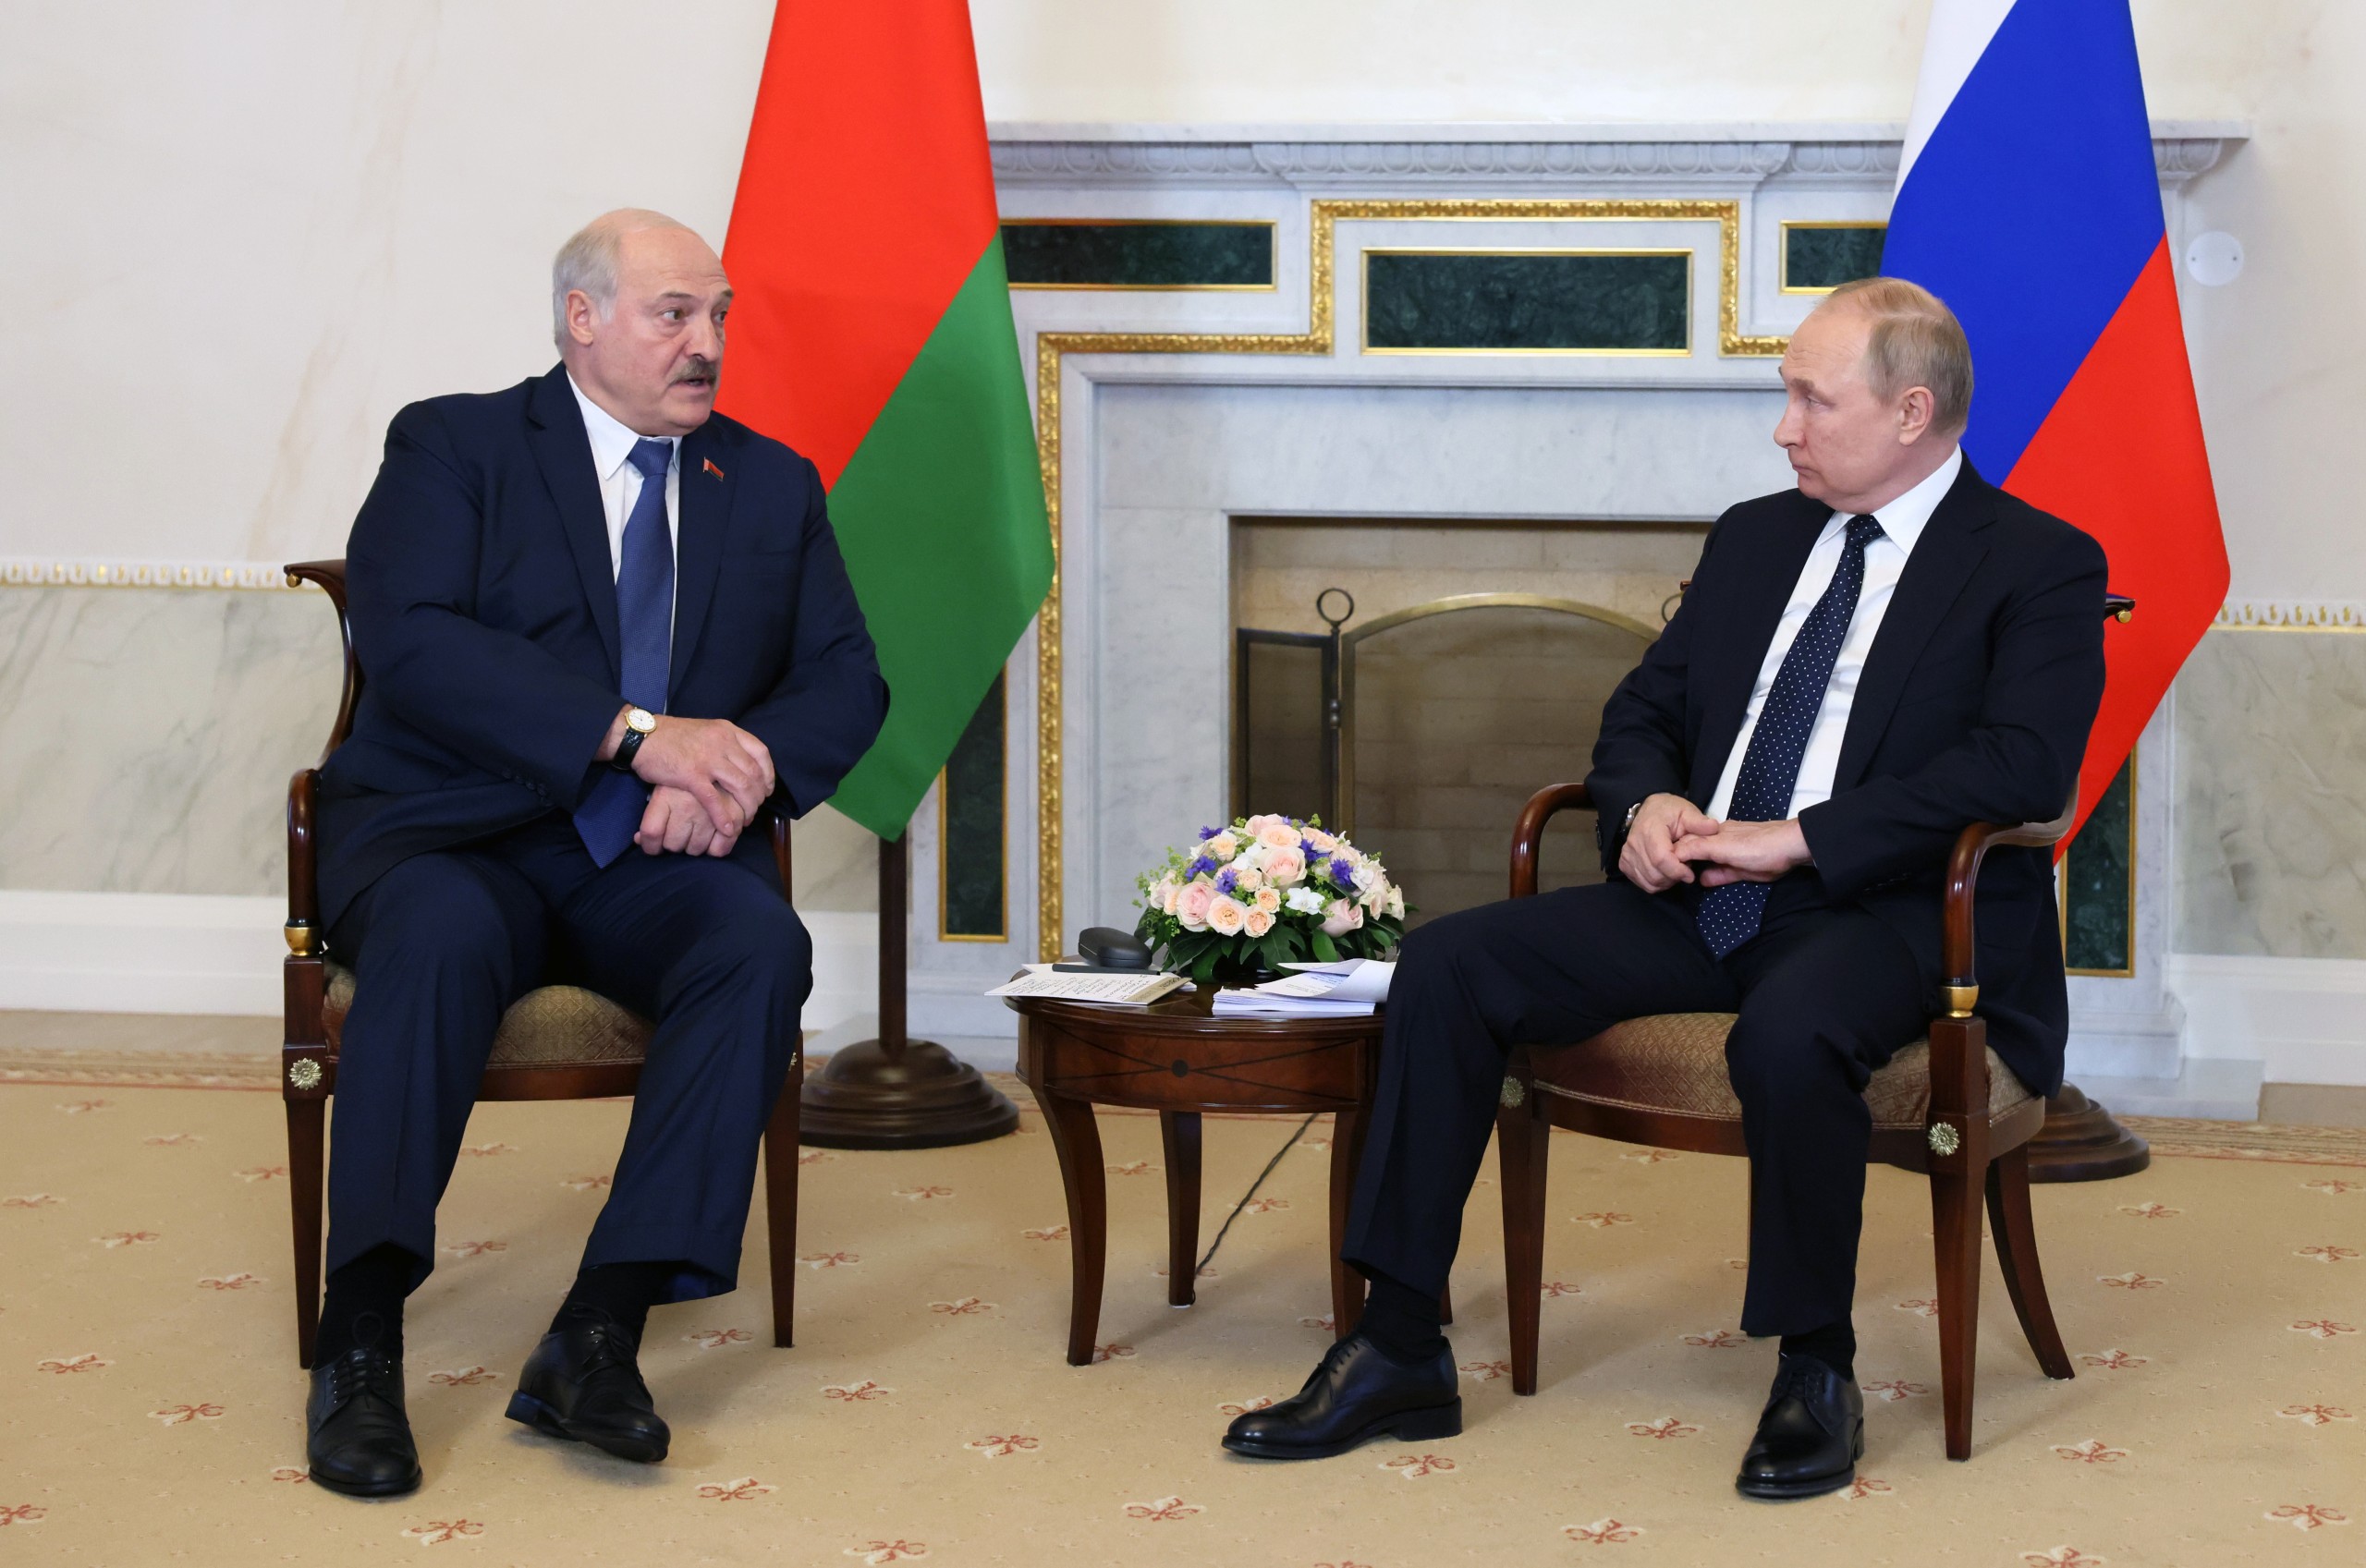 epa10033632 Russian President Vladimir Putin (R) speaks with Belarusian President Alexander Lukashenko during their meeting in the Konstantinovsky Palace in St.Petersburg, Russia, 25 June 2022. The meeting is taking place on the day of the 30th anniversary of the establishment of diplomatic relations between the two countries. During the conversation, Alexander Lukashenko asked Vladimir Putin to help adapt Belarusian aircraft to be equipped with nuclear warheads. Vladimir Putin said that Russia would hand over the Iskander-M complexes to Minsk in the coming months.  EPA/MIKHAIL METZEL / KREMLIN / POOL MANDATORY CREDIT